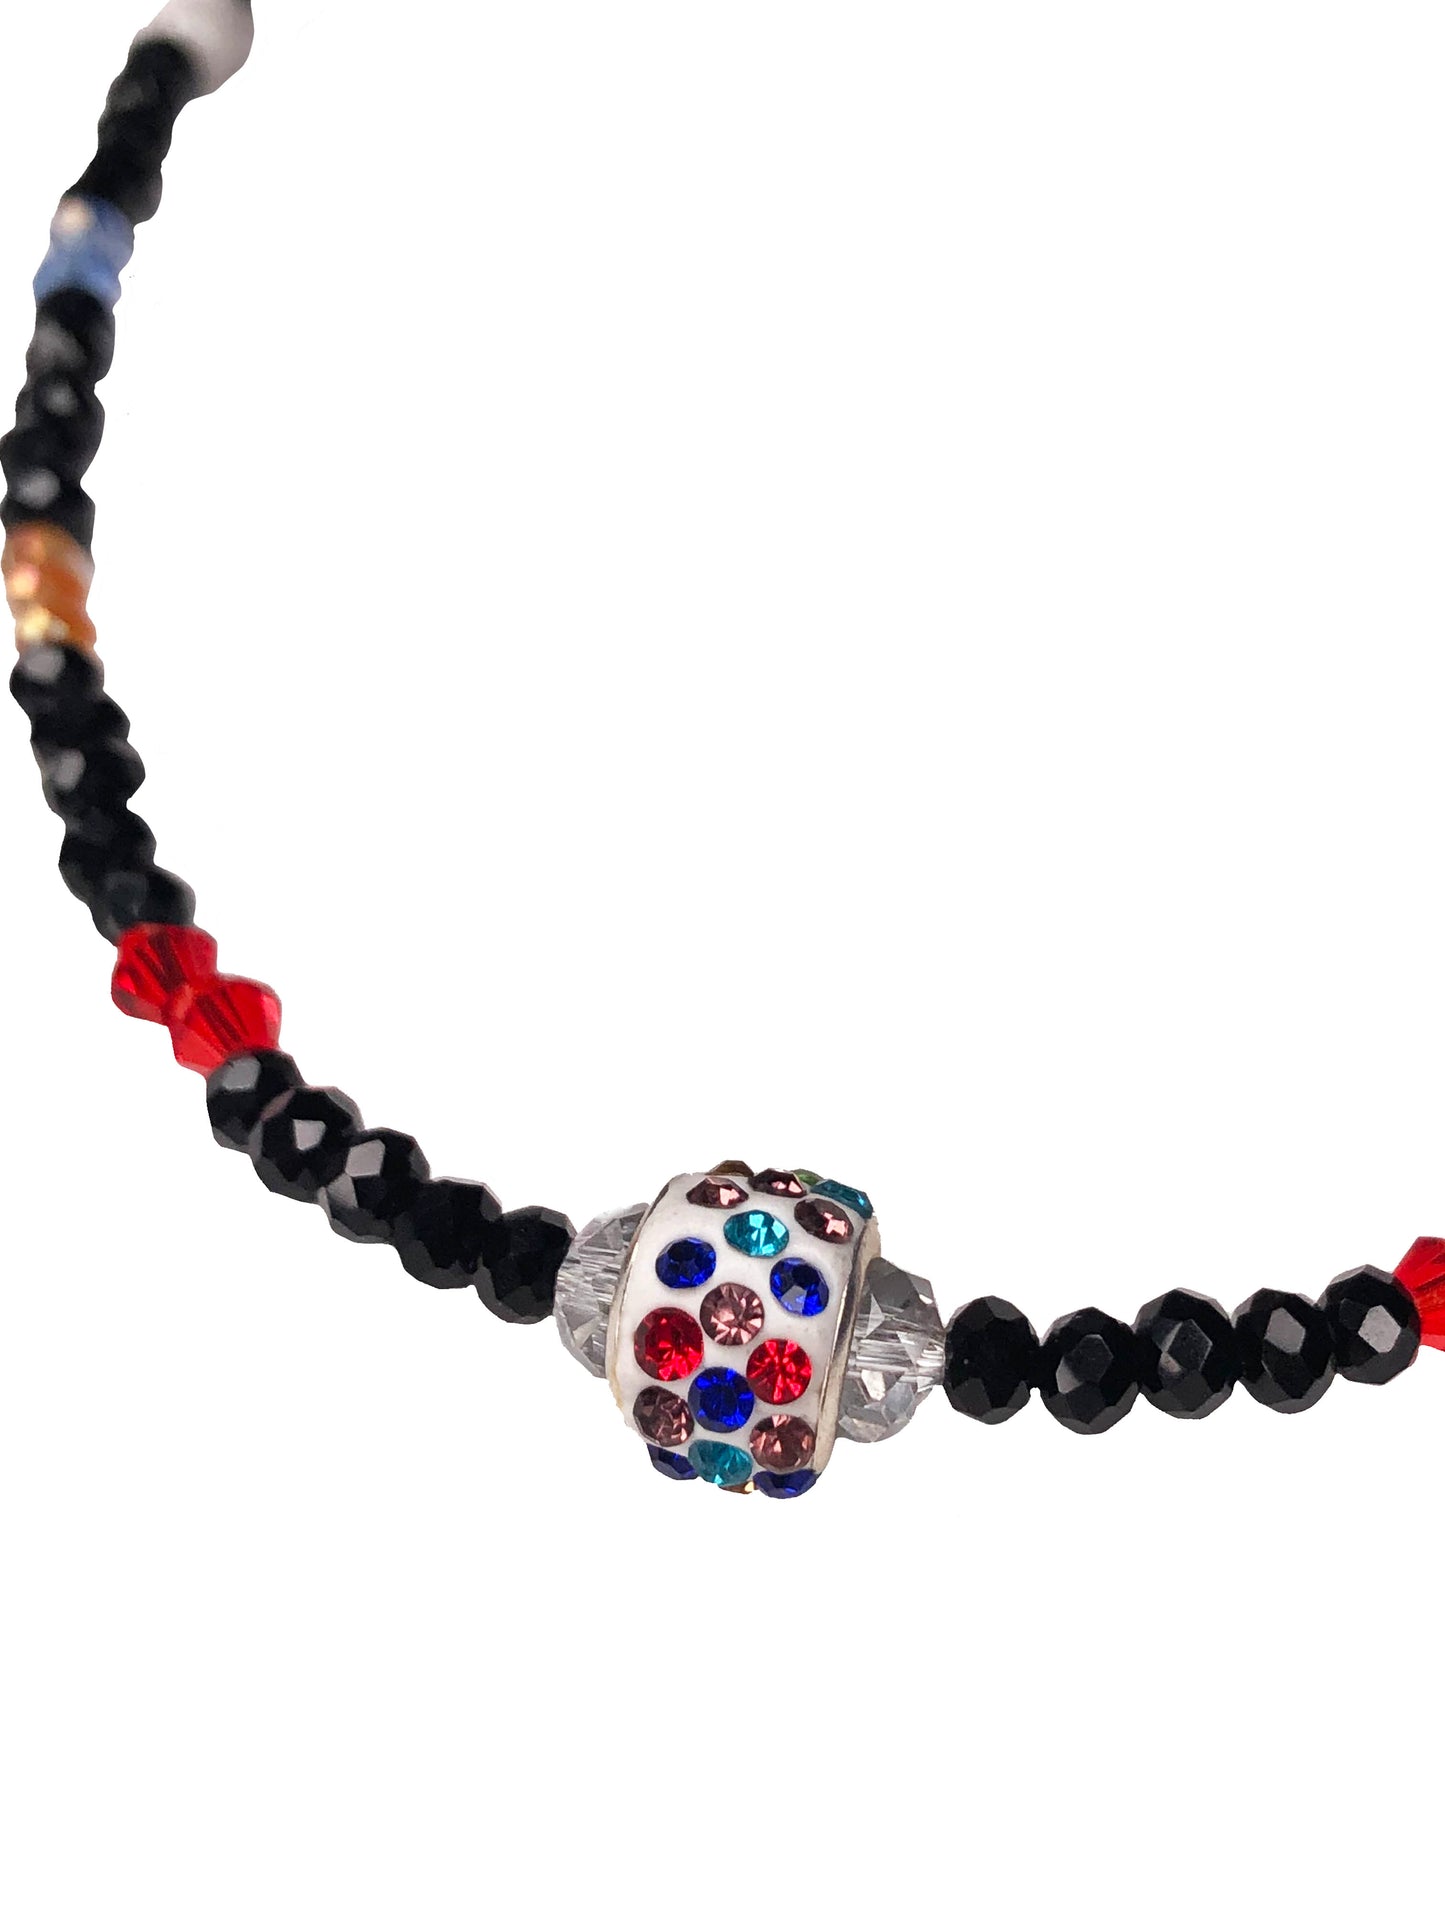 Handcrafted beaded crystal necklace made using black, blue, clear, orange, purple, and red crystal beads with white glass beads. At its center is a multicolor rhinestone charm.